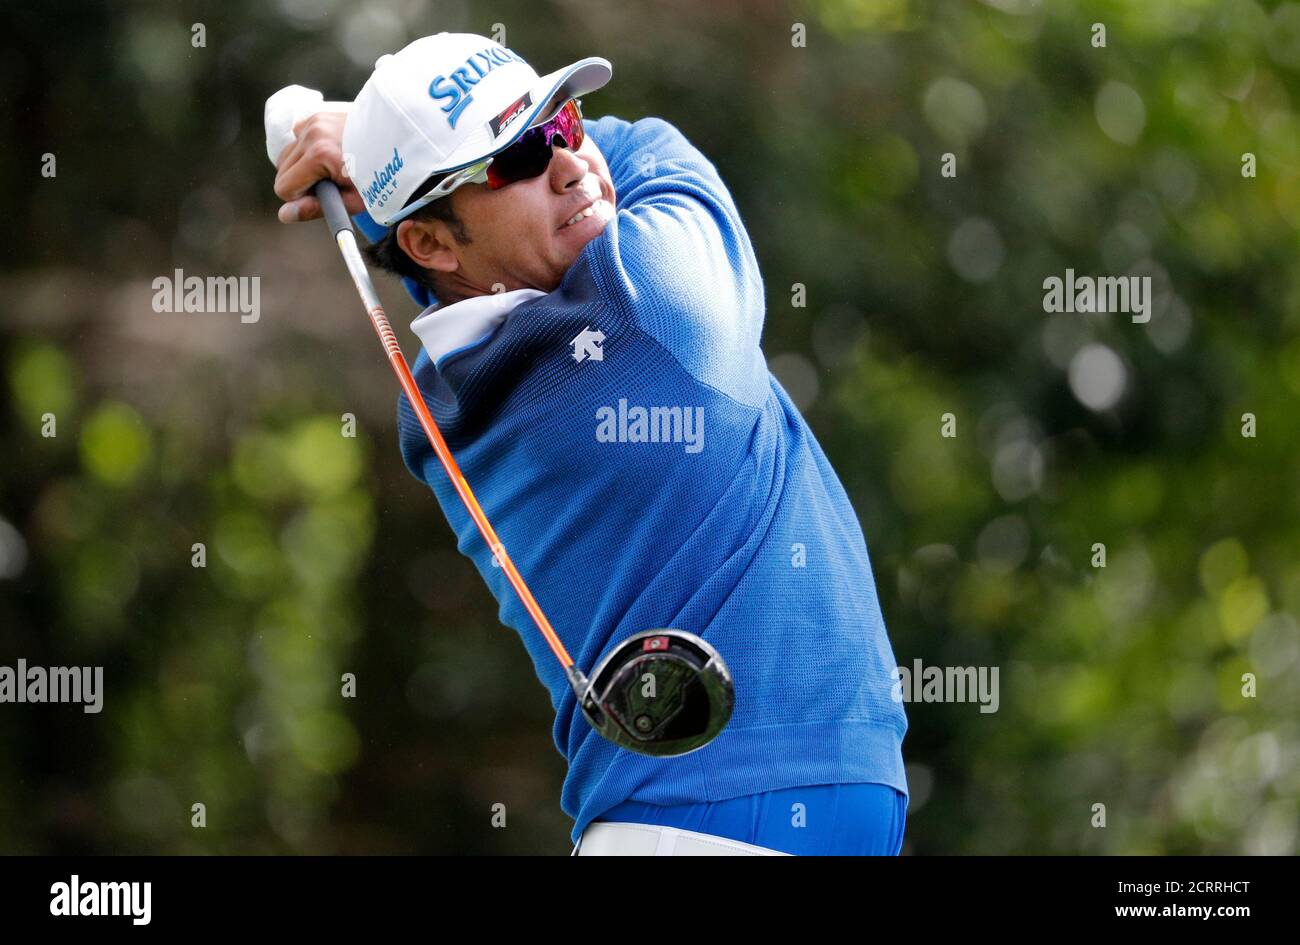 Hideki Matsuyama of Japan hits off the second tee in first round play during the 2017 Masters golf tournament at Augusta National Golf Club in Augusta, Georgia, U.S., April 6, 2017. REUTERS/Lucy Nicholson Banque D'Images